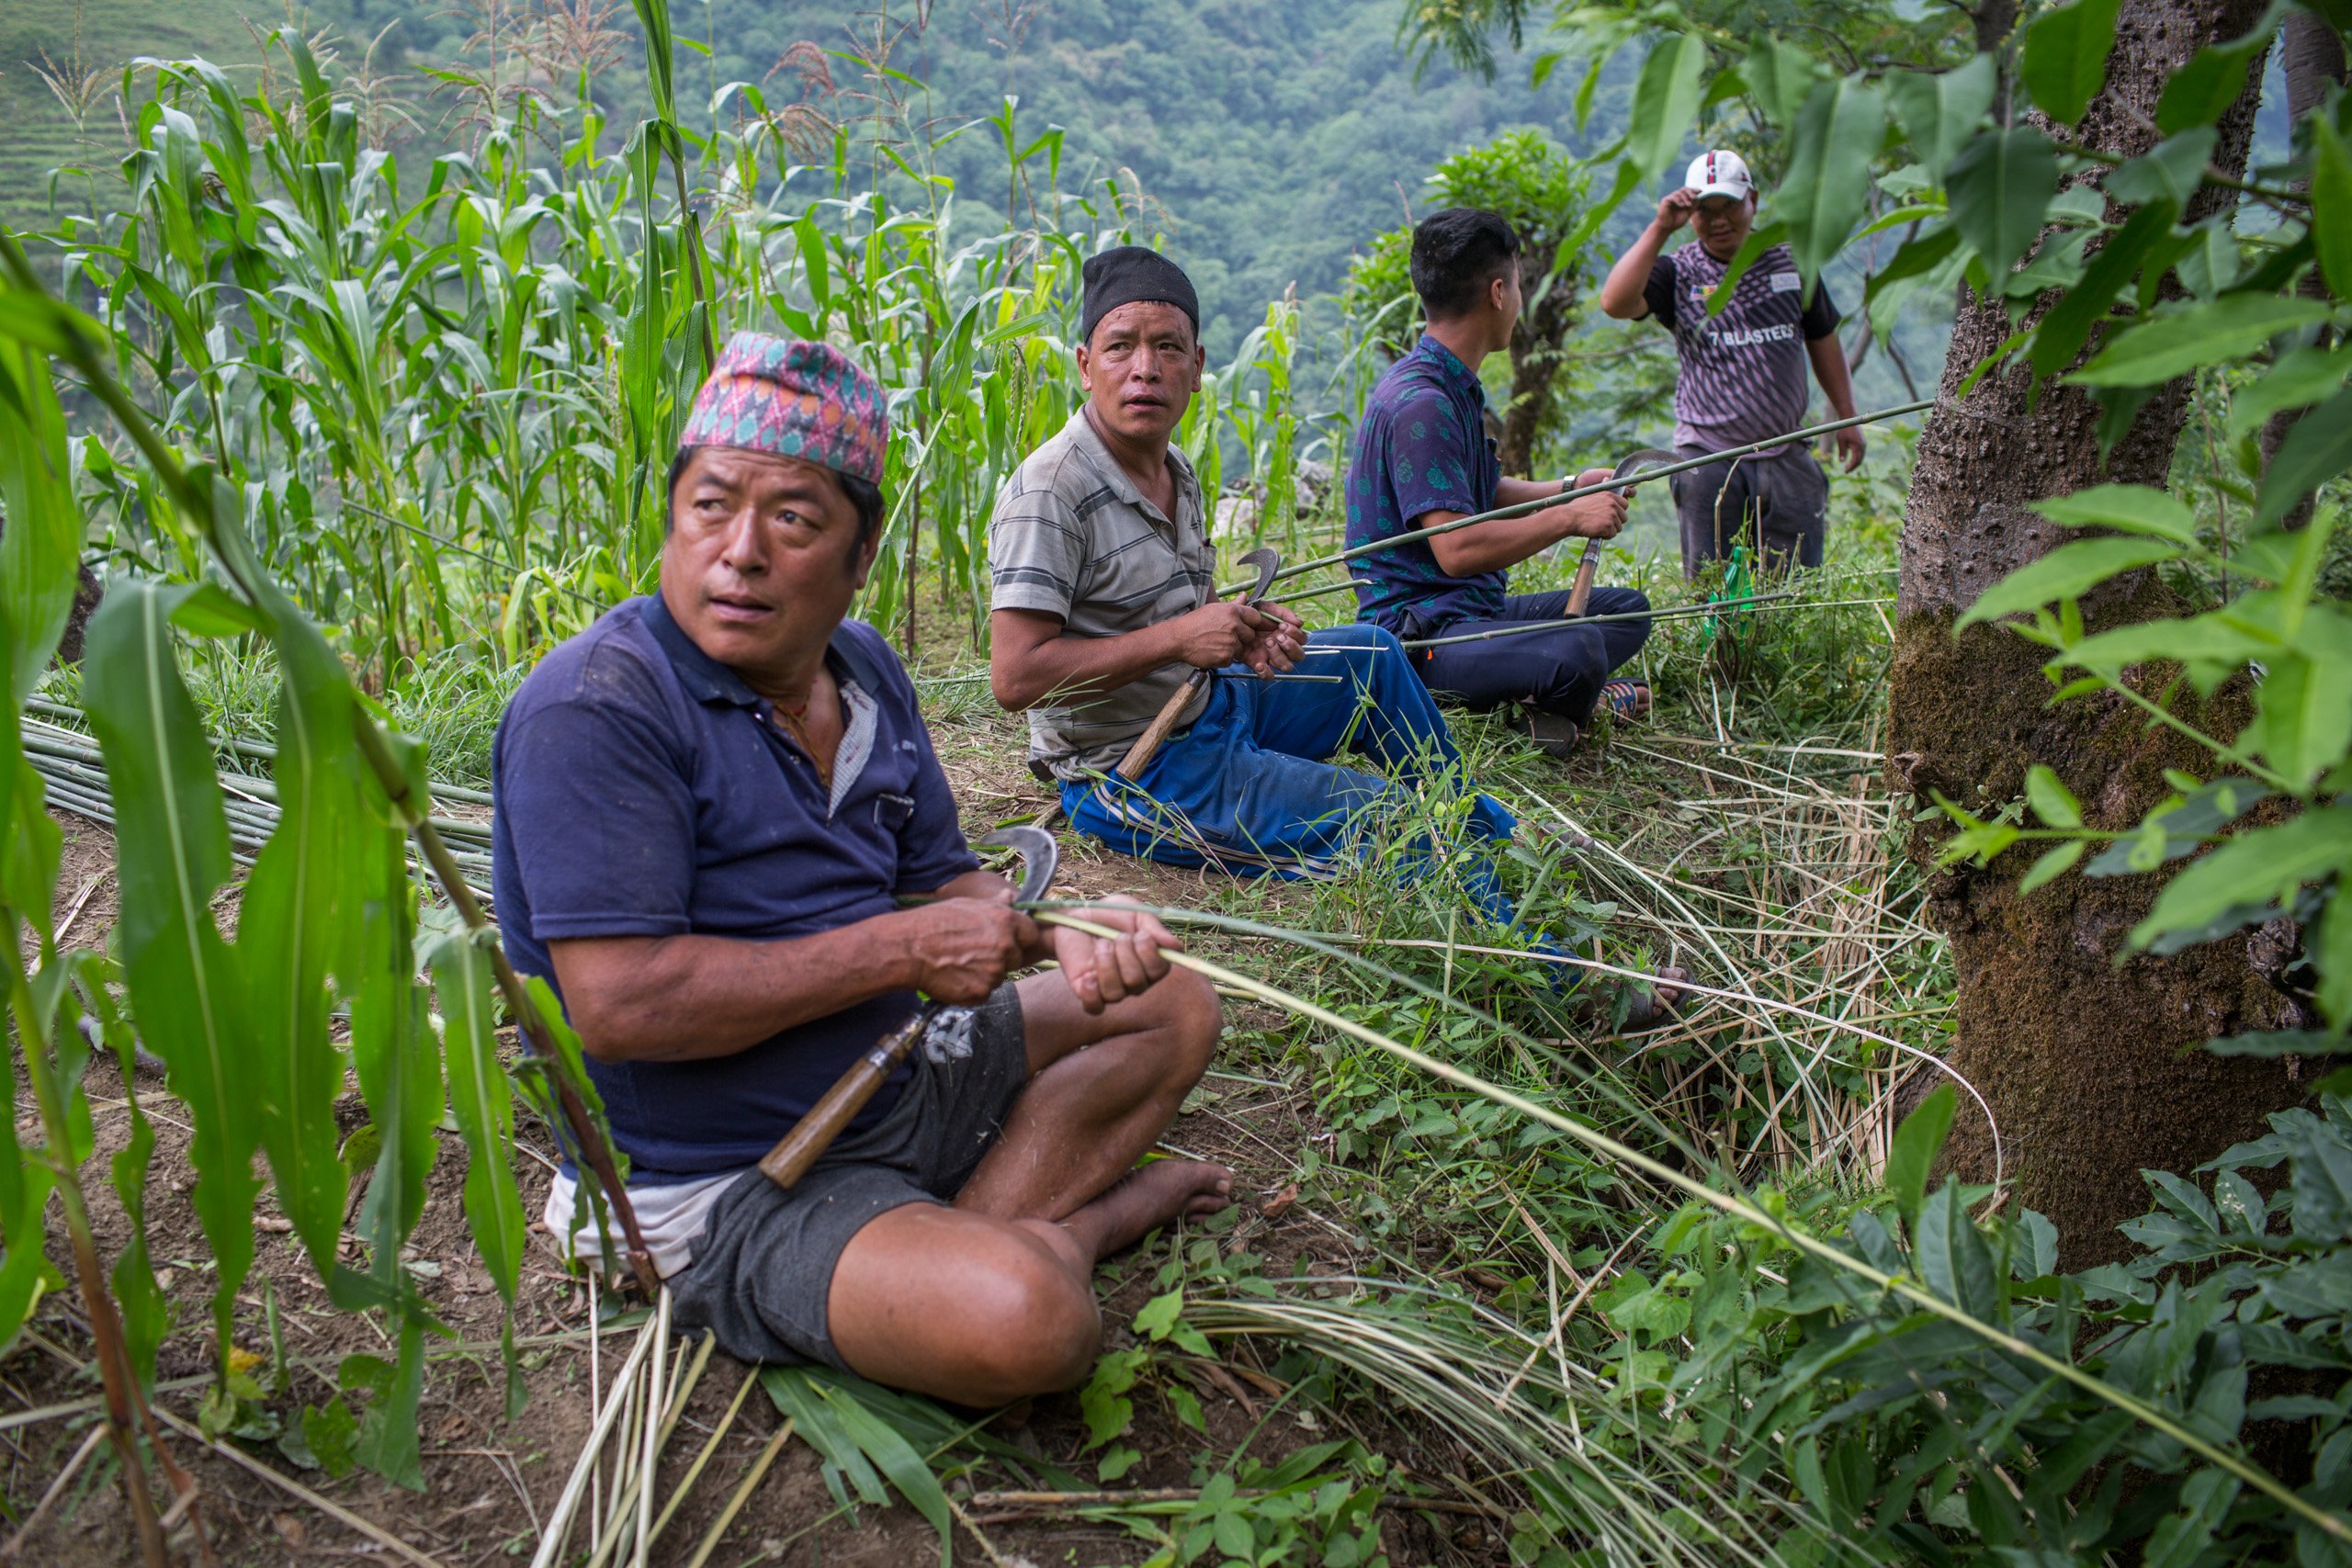 Ganga (second from left) and his fellow Naiche villagers cut wild bamboo into thin strips, which they will use to make the ladder needed for the honey hunt 